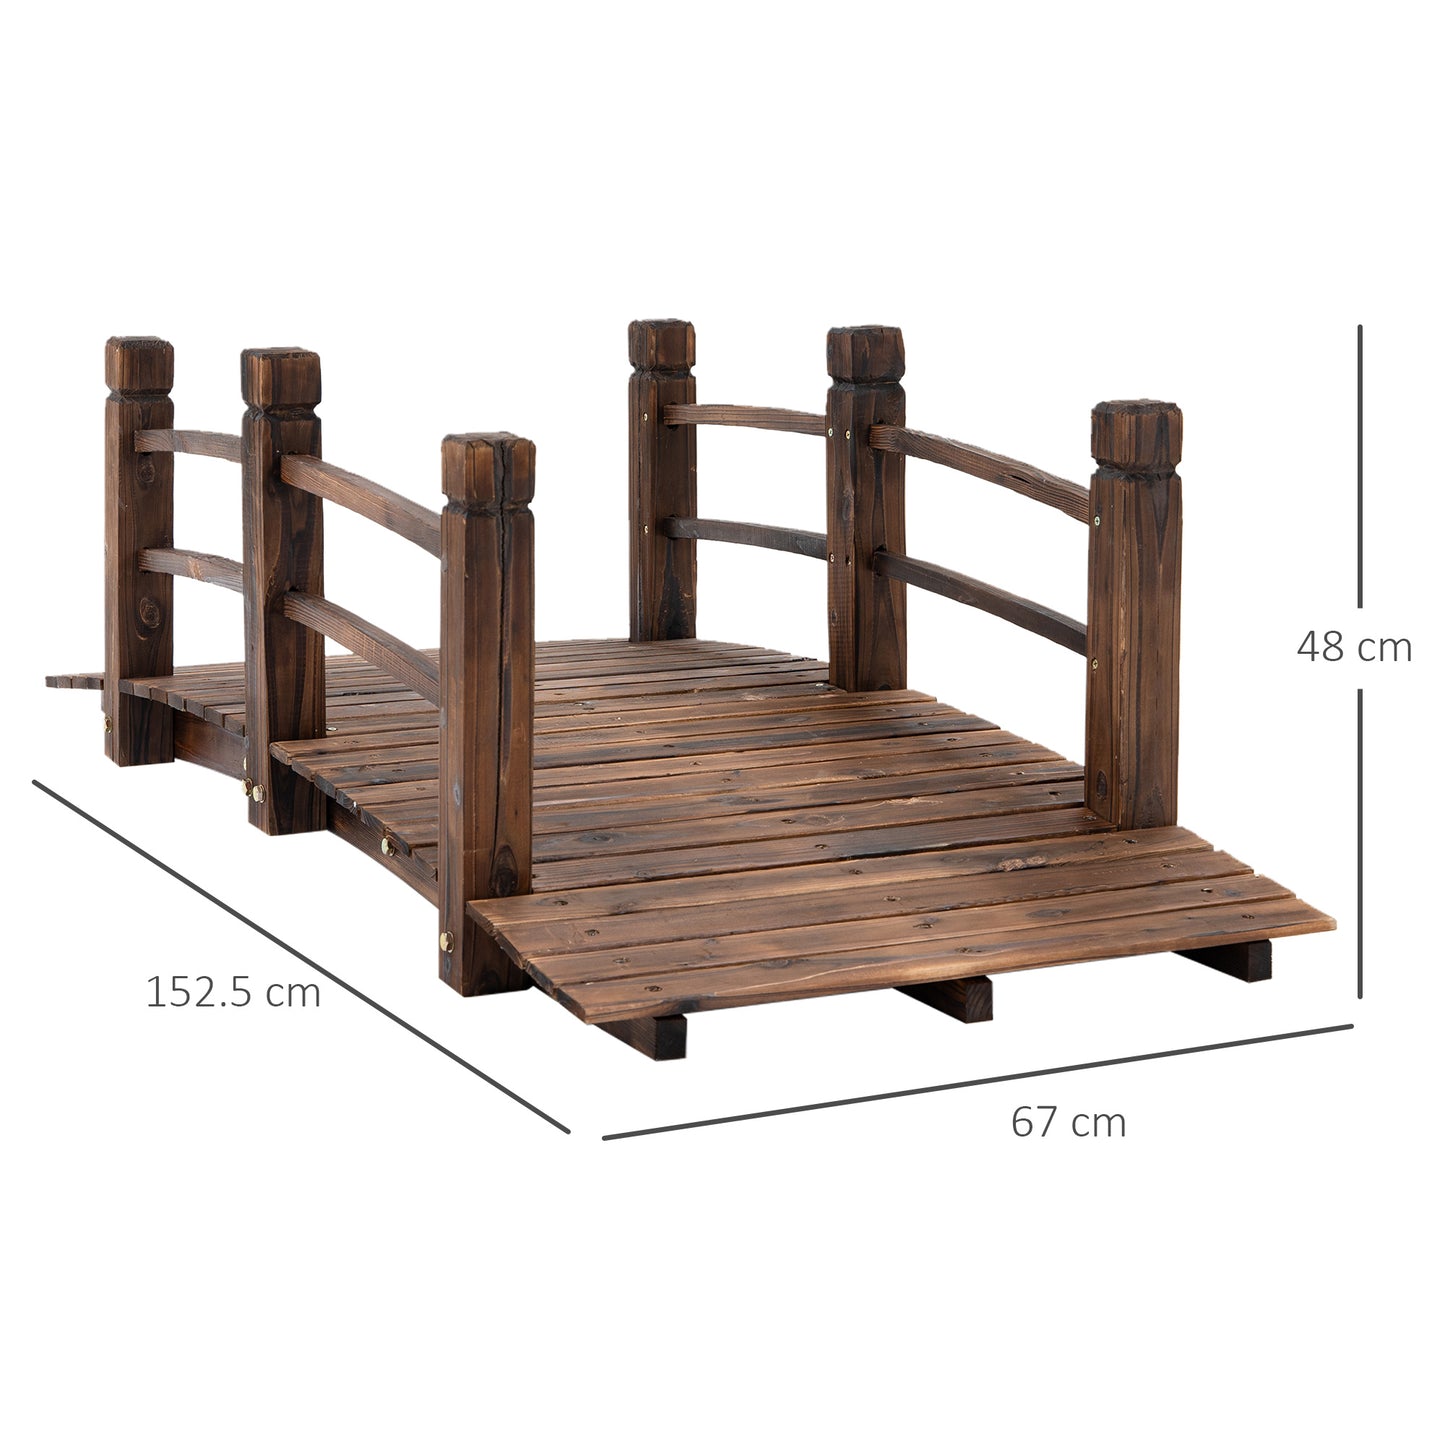 Outsunny Wooden Garden Bridge Lawn Décor Stained Finish Arc Outdoor Pond Walkway w/ Railings